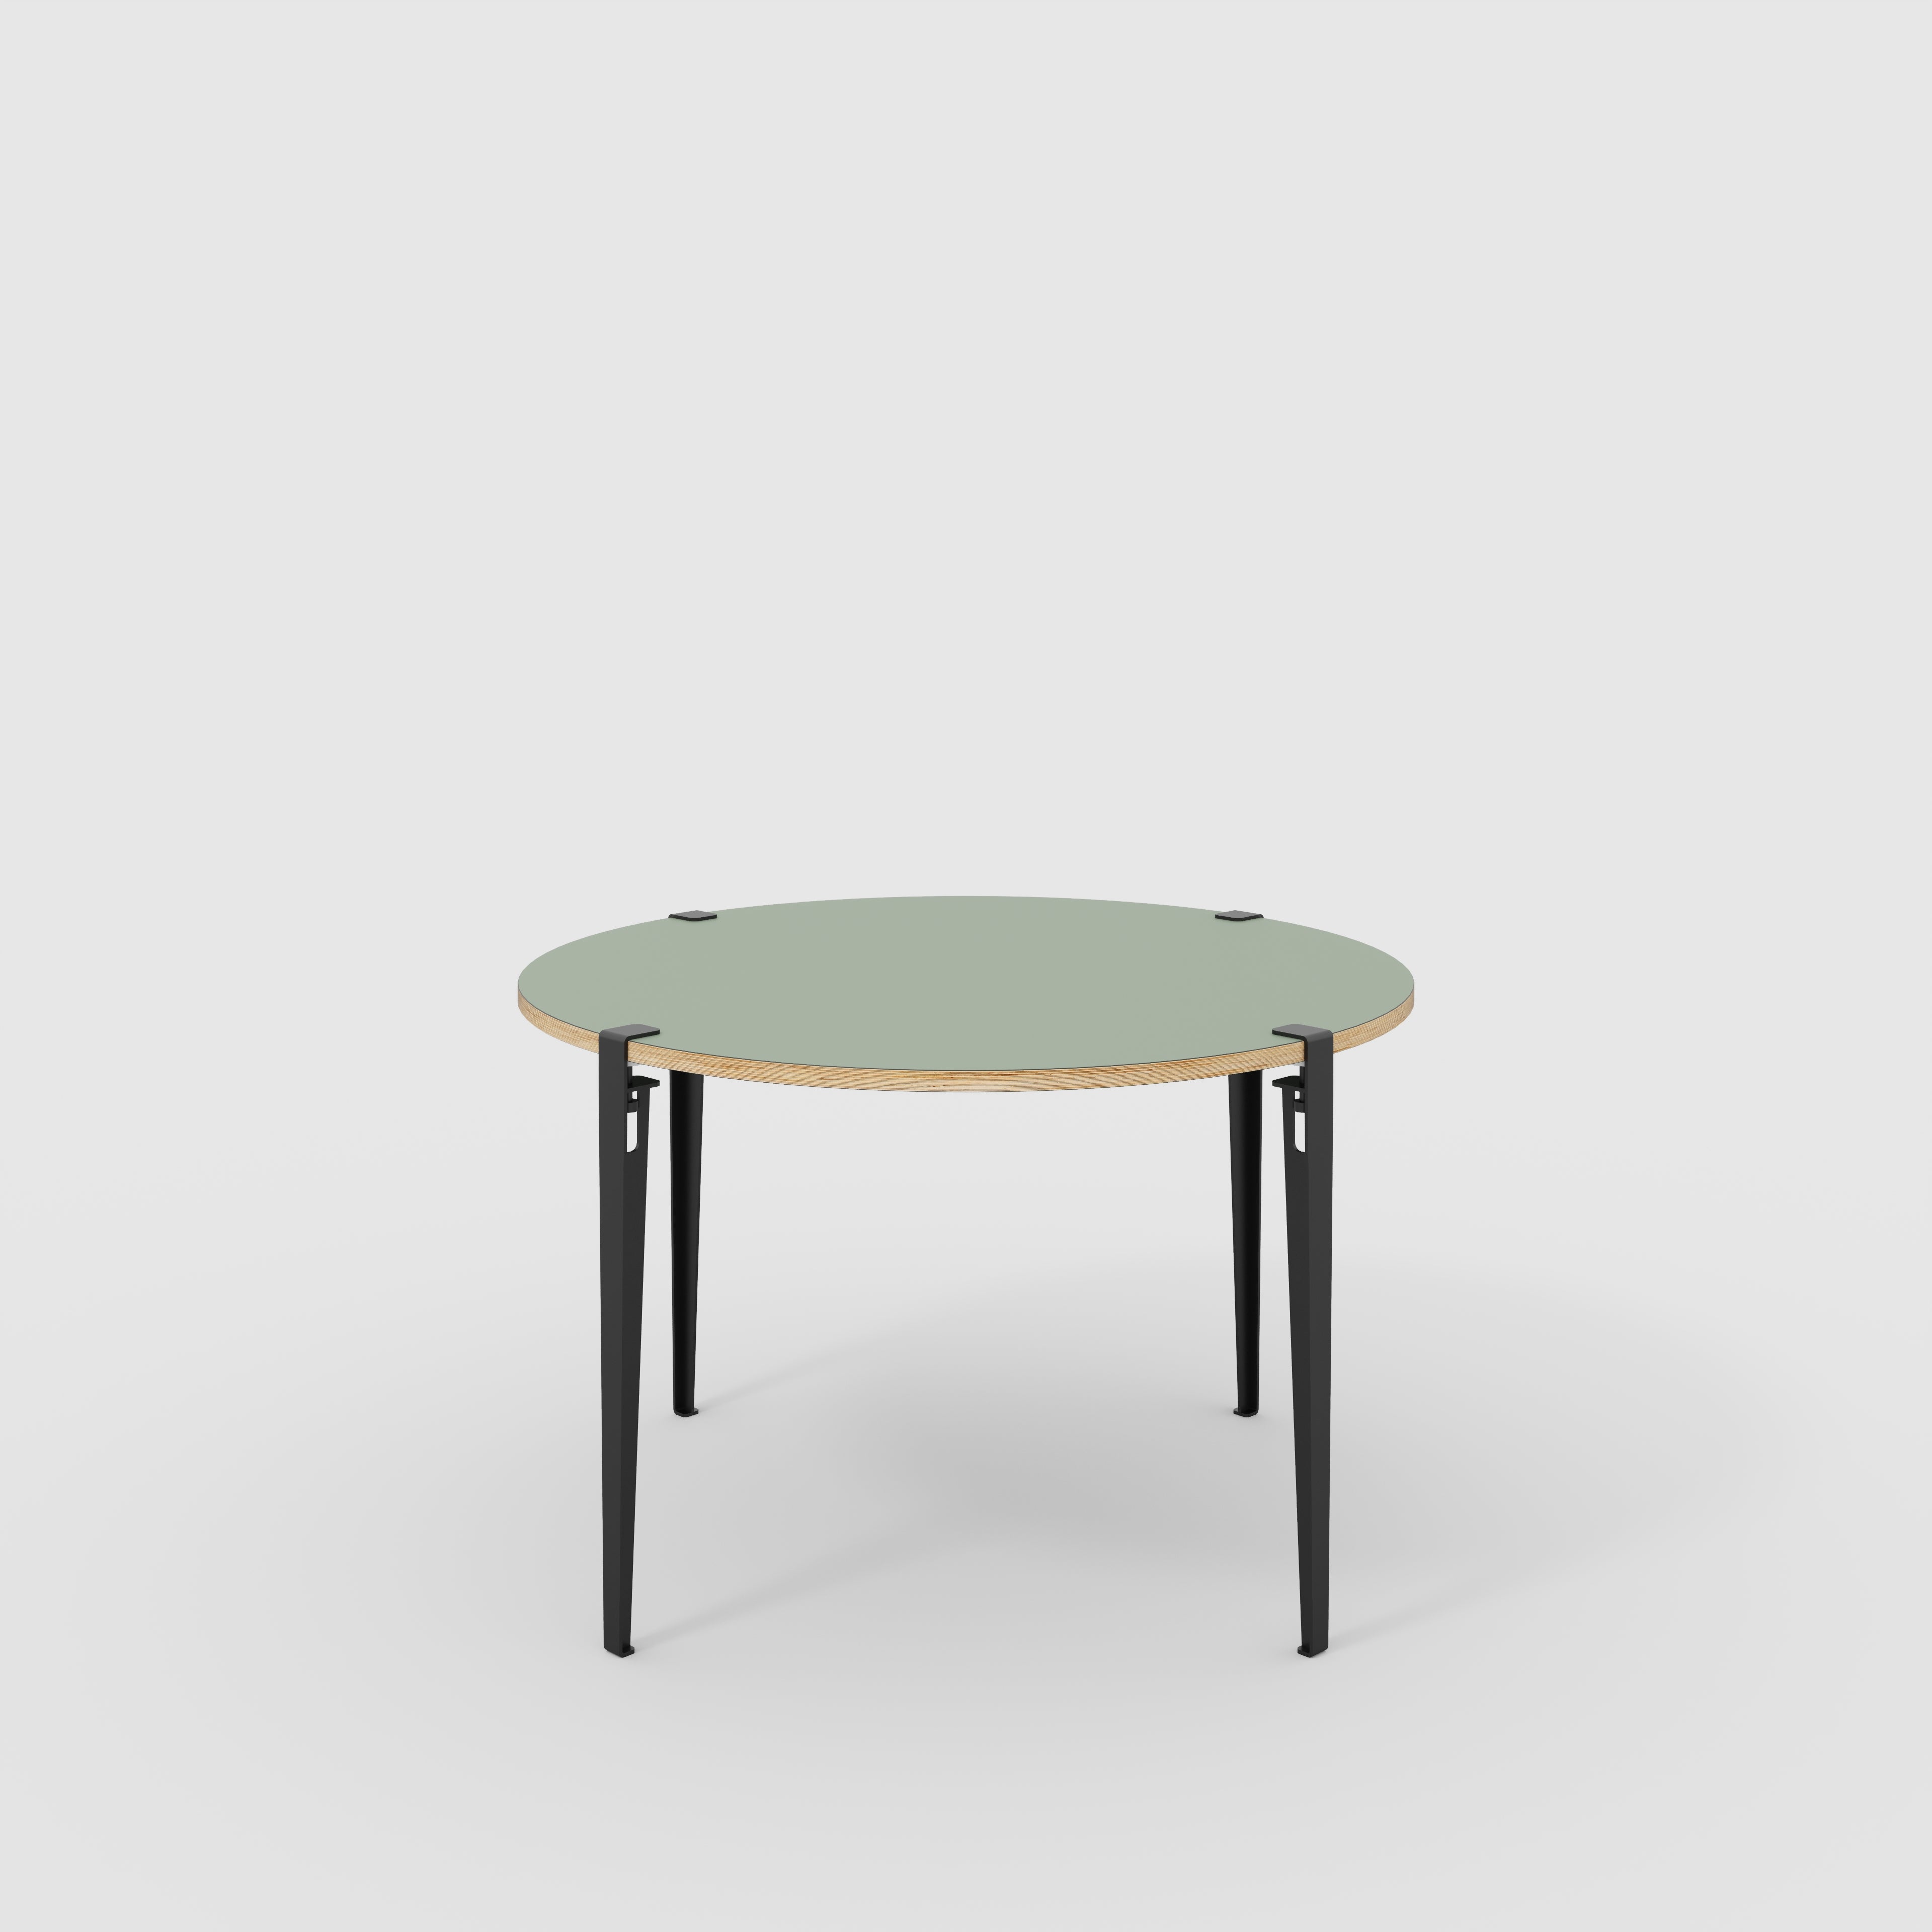 Round Table with Black Tiptoe Legs - Formica Green Slate - 1200(dia) x 750(h)